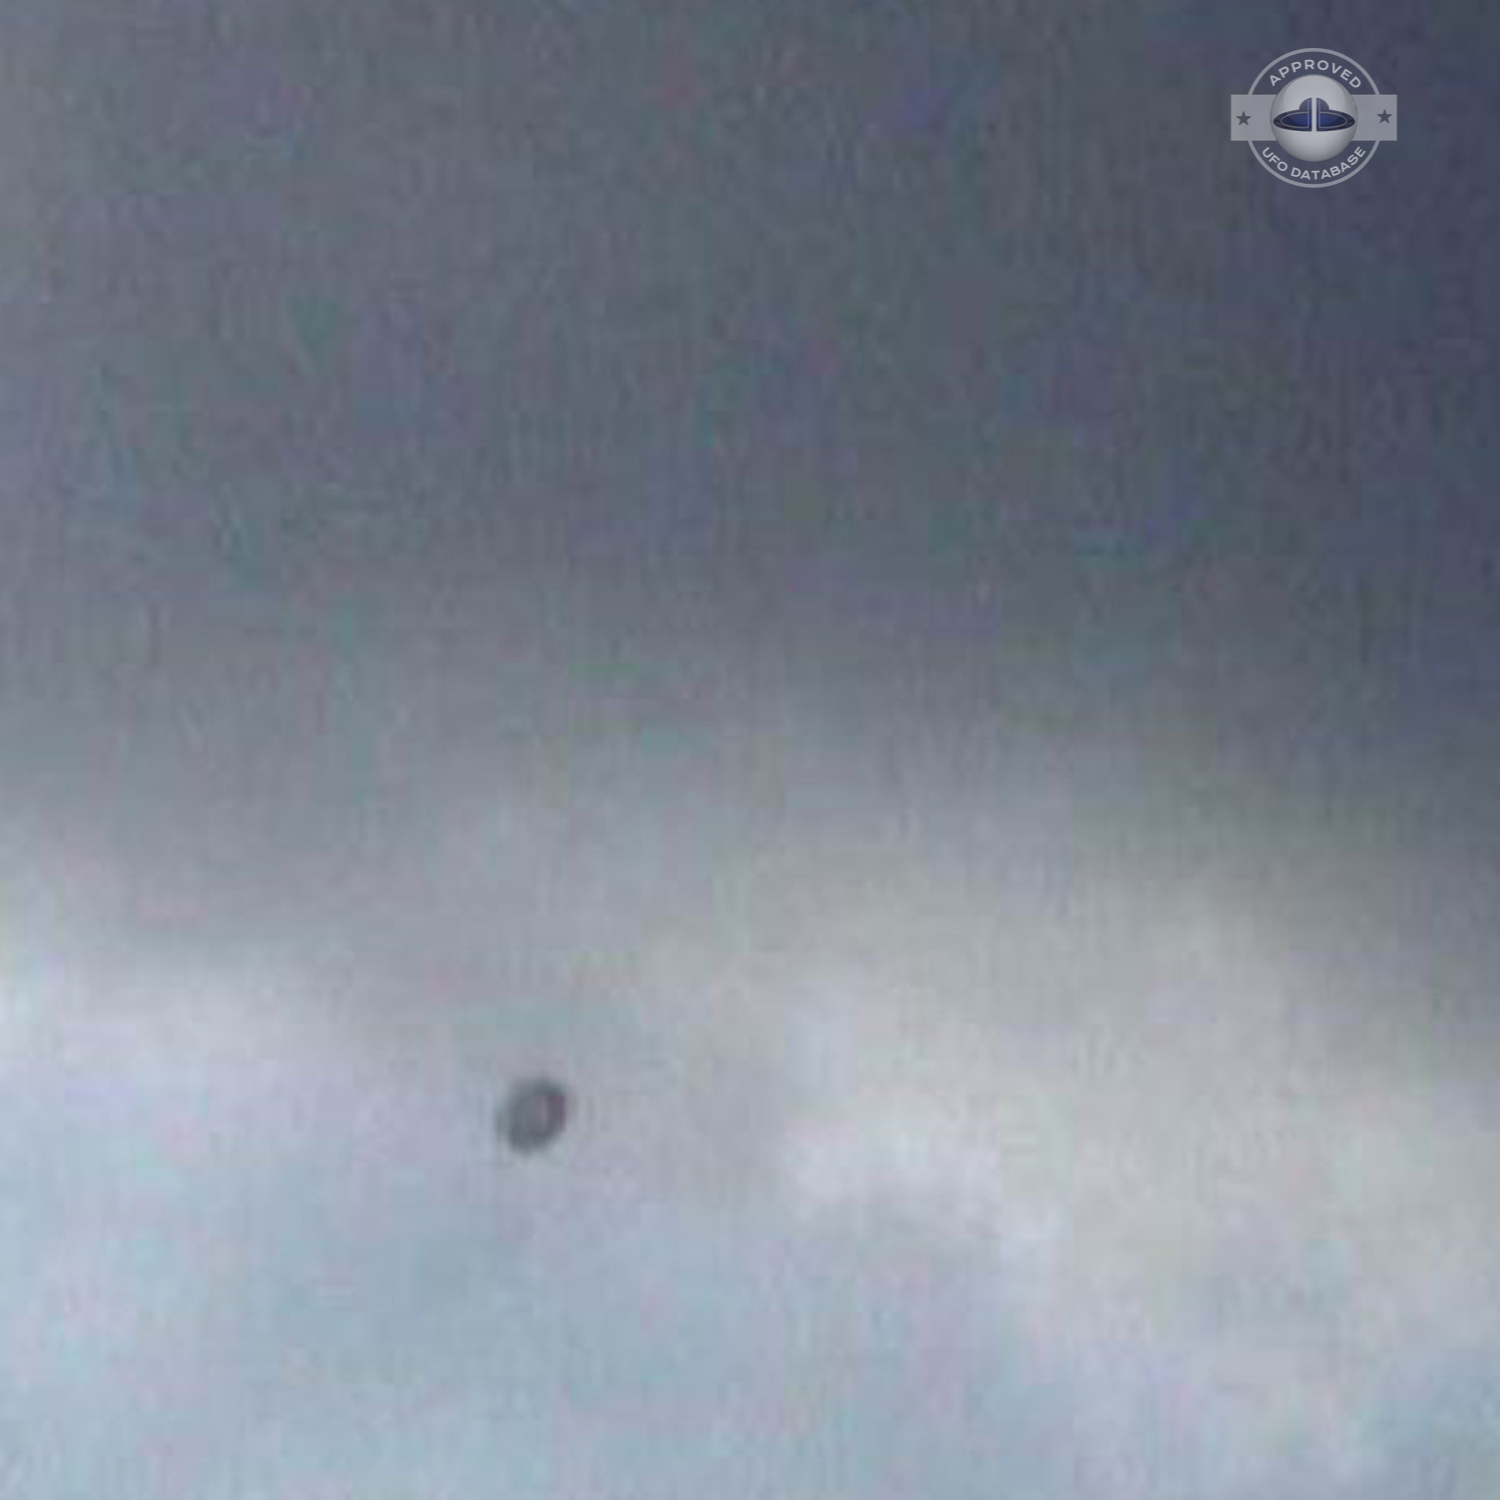 UFO Pictures UFOdB.com - UFO near airplane in England in 2002 UFO Picture #63-2